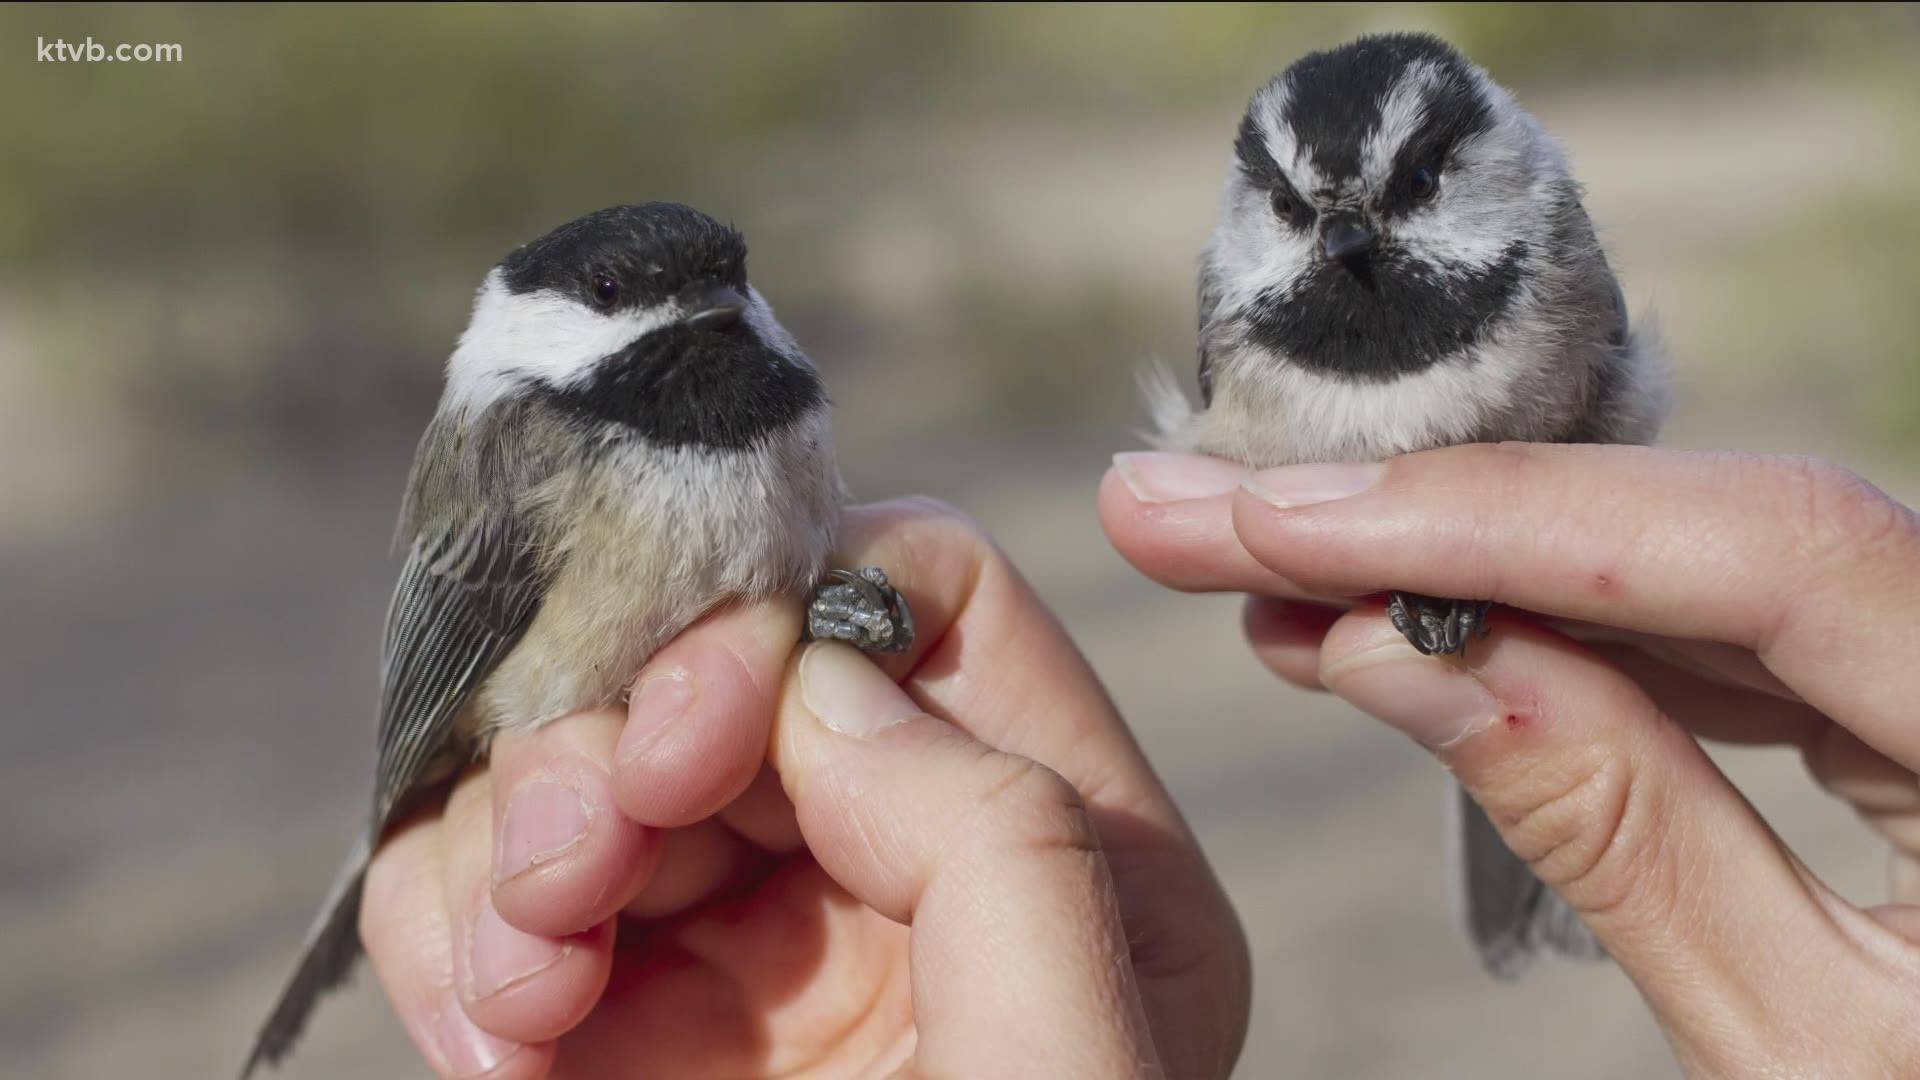 Heidi Ware Carlisle says banding is a simple but effective way to gather information about bird lifespans, population trends, and changes happening in an ecosystem.